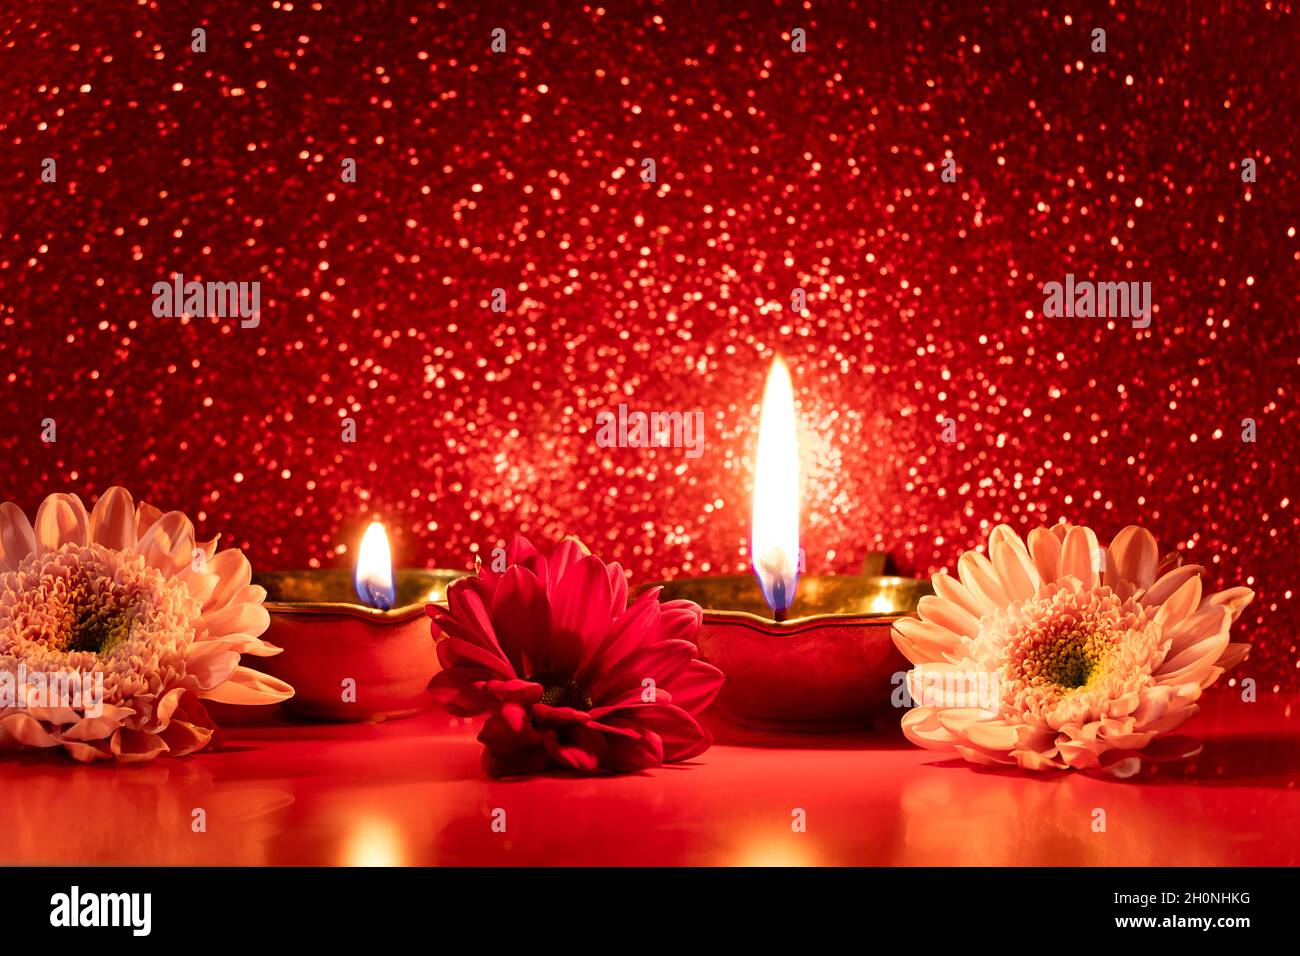 Happy Diwali. Burning diya oil lamps and flowers on red glittering background. Celebrating the traditional Indian festival of light. Copy space. Stock Photo